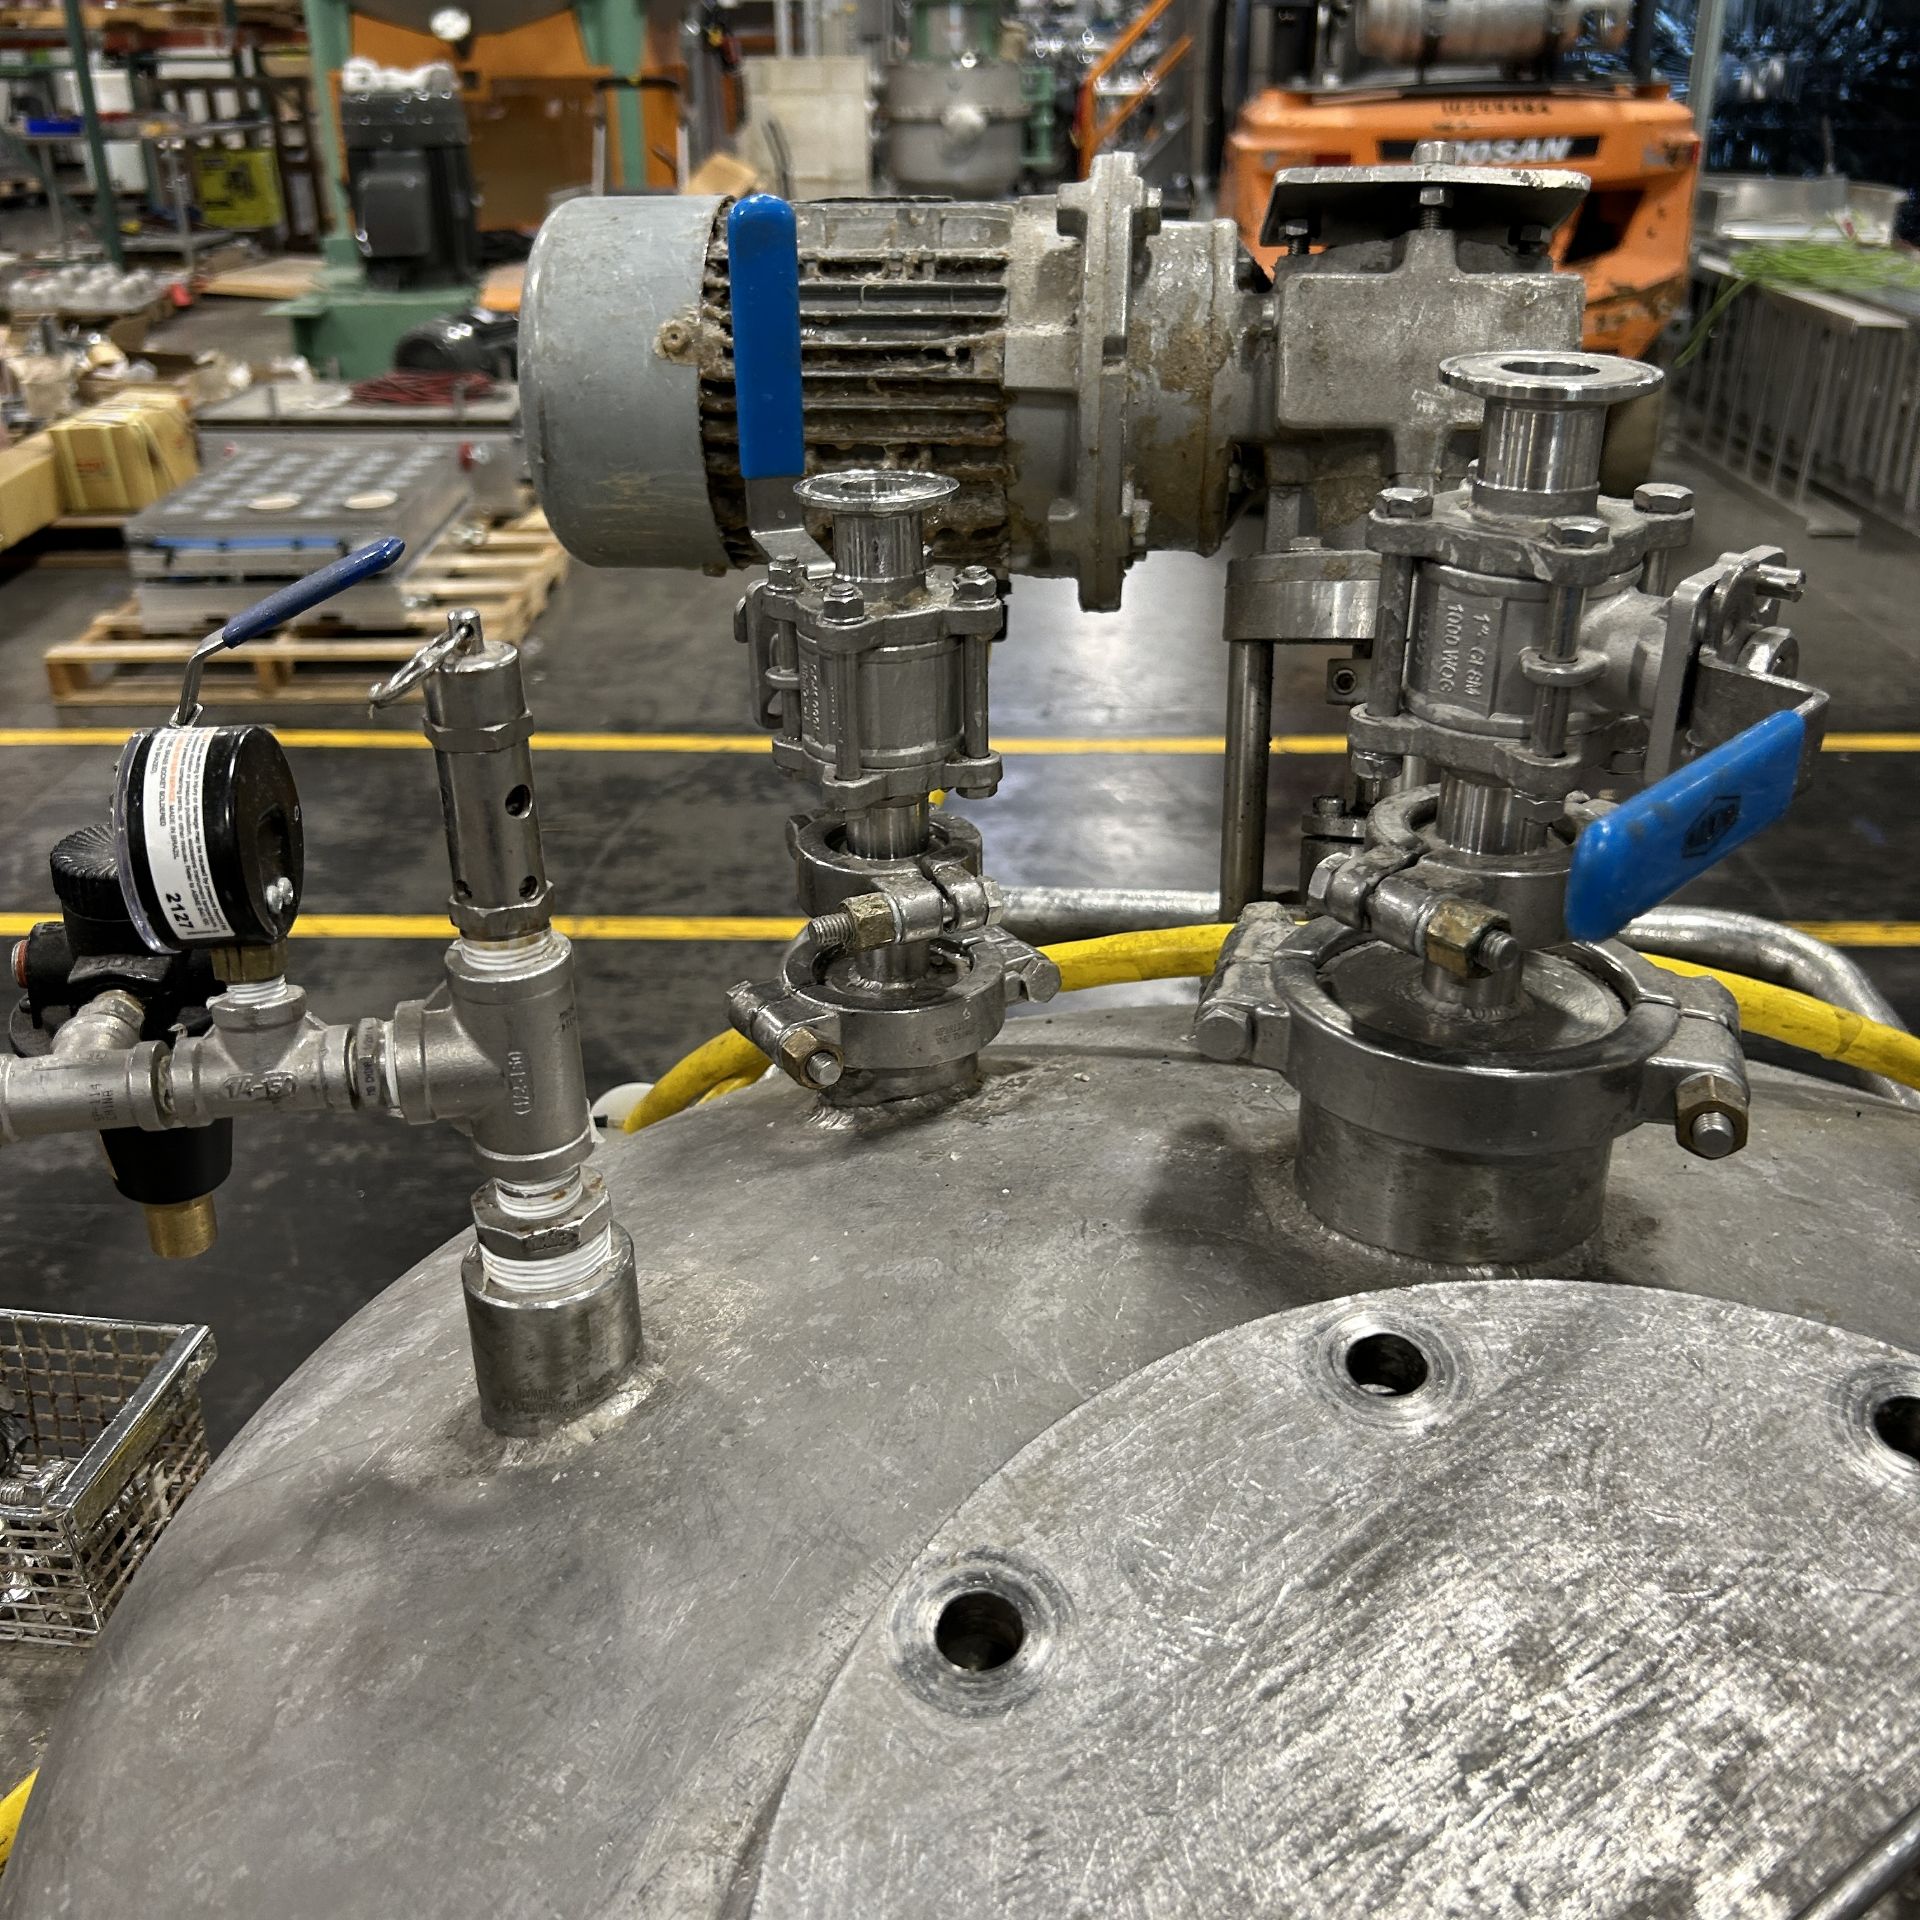 2019 Amherst Stainless Steel Agitation Pressure Pot - Image 6 of 8